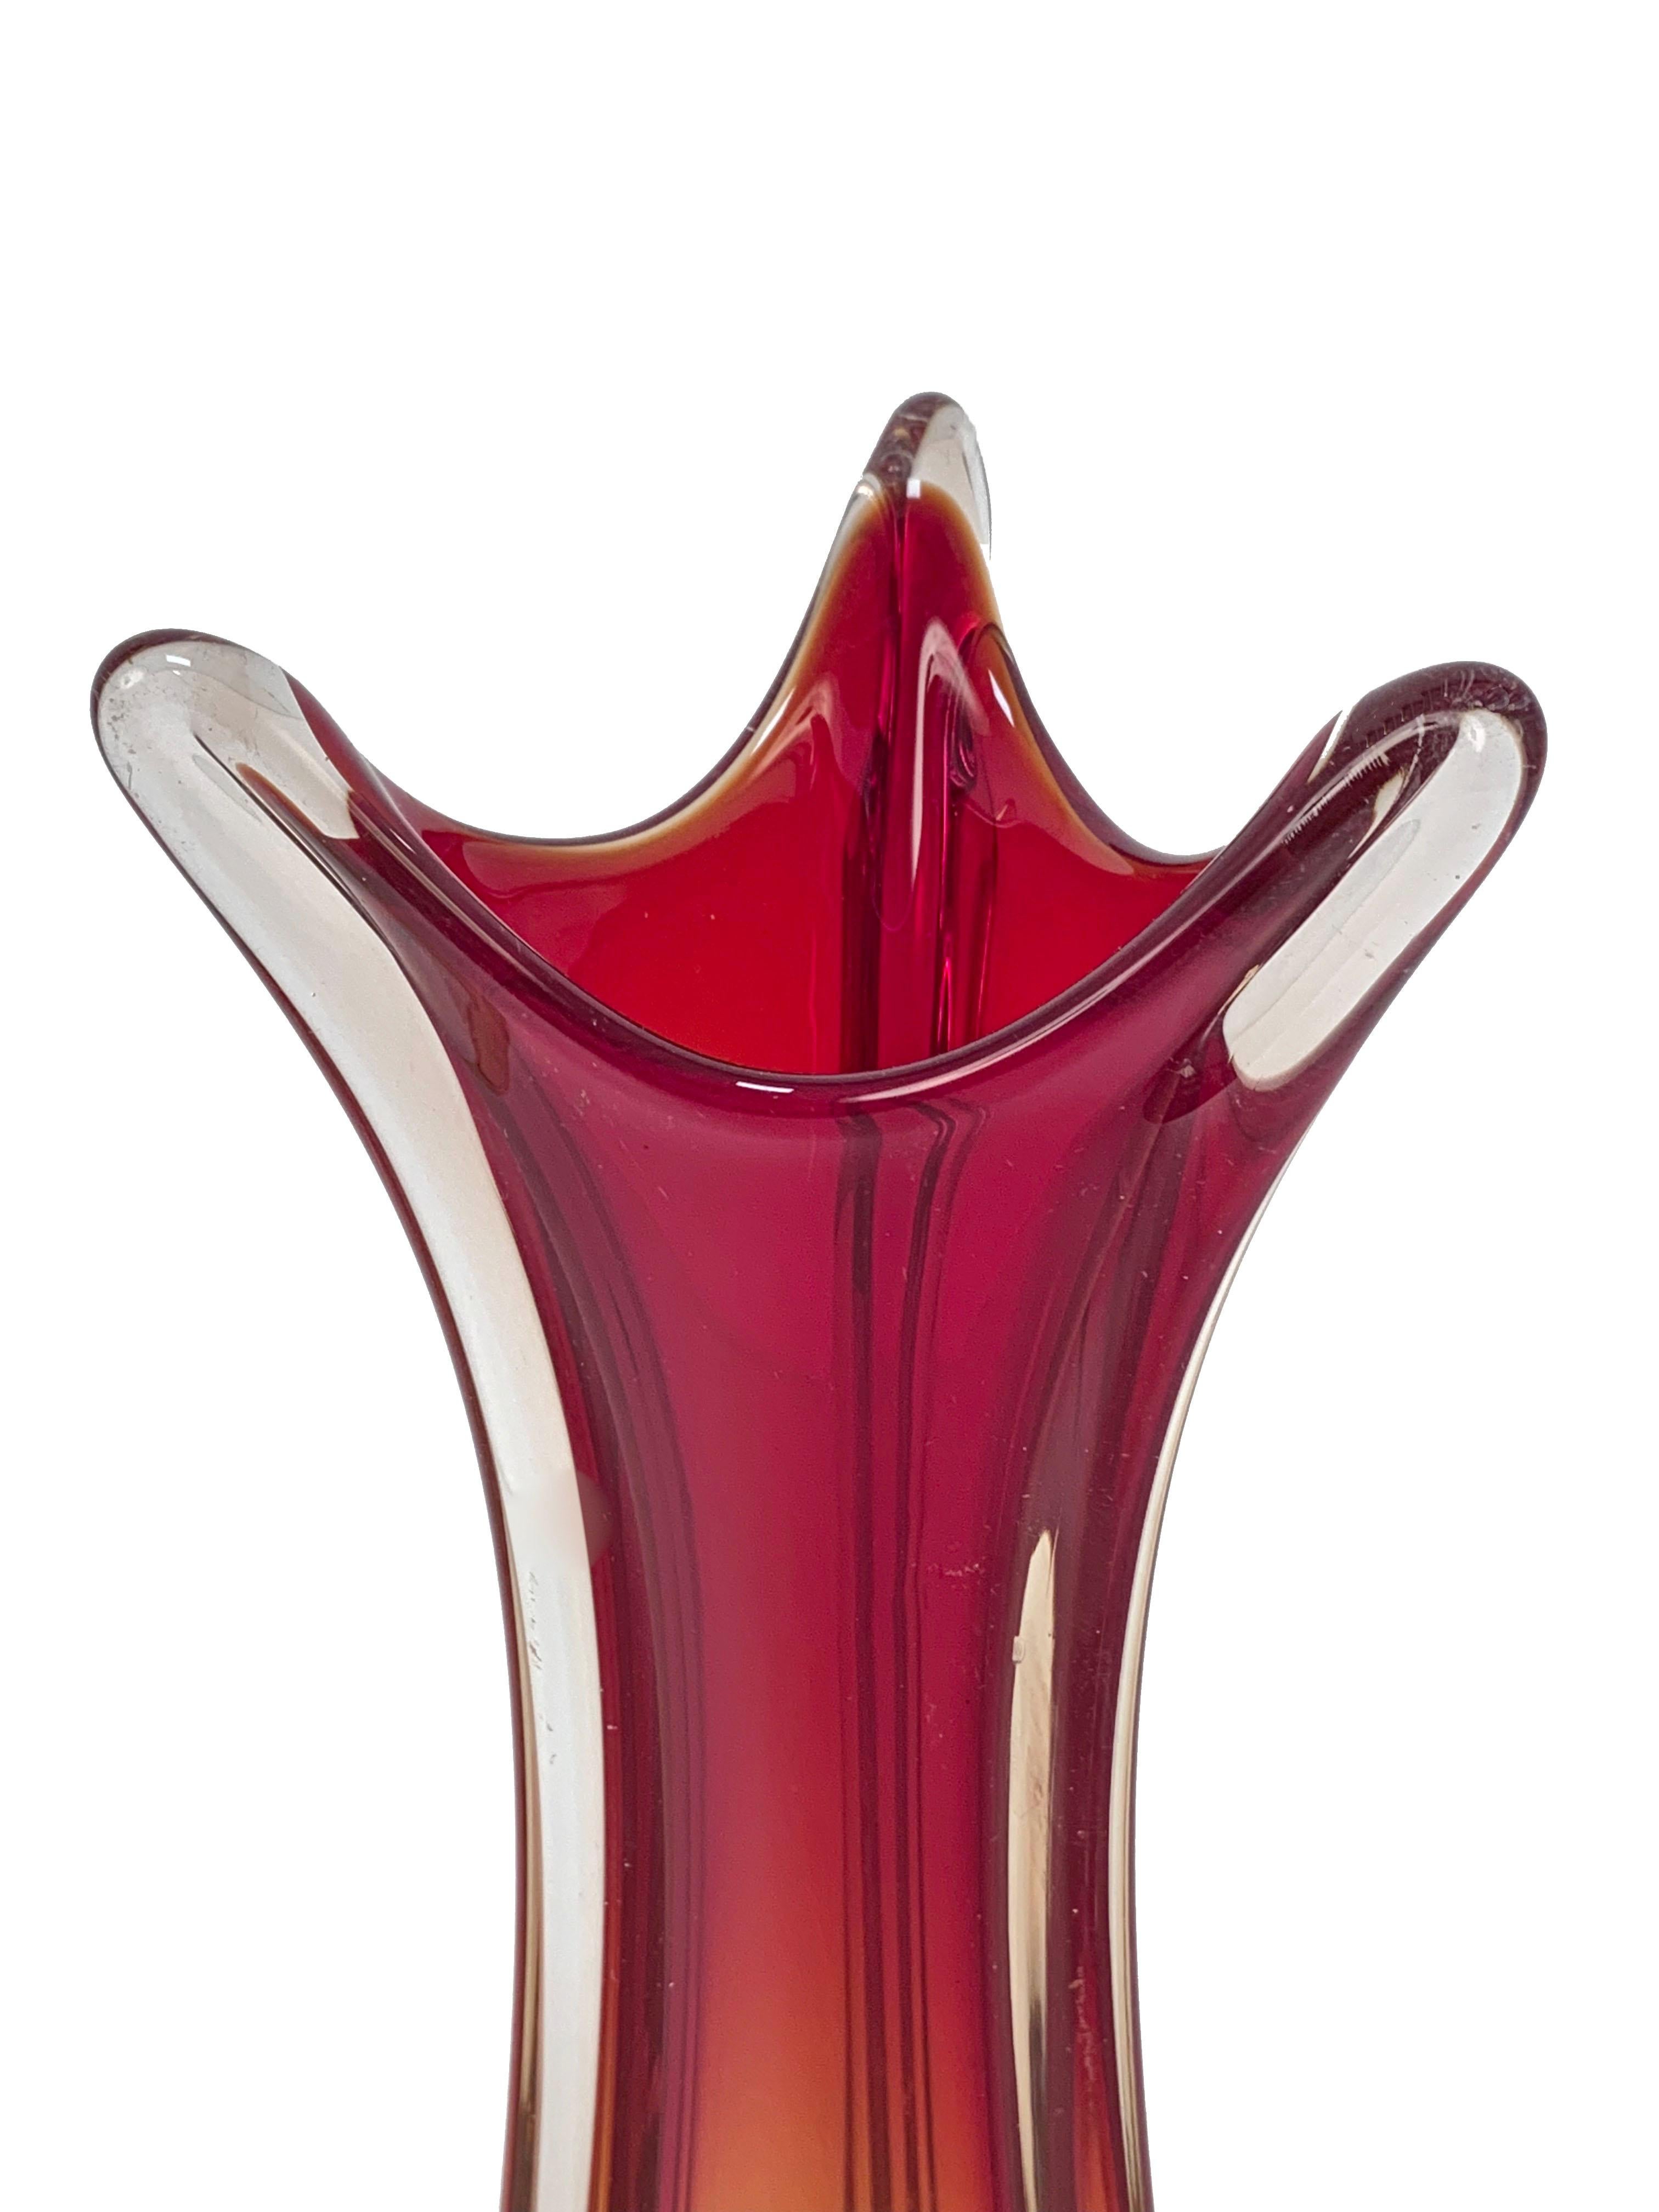 Large submerged Murano glass vase. Gradient color from red to orange. Half of the century attributed to Flavio Poli.